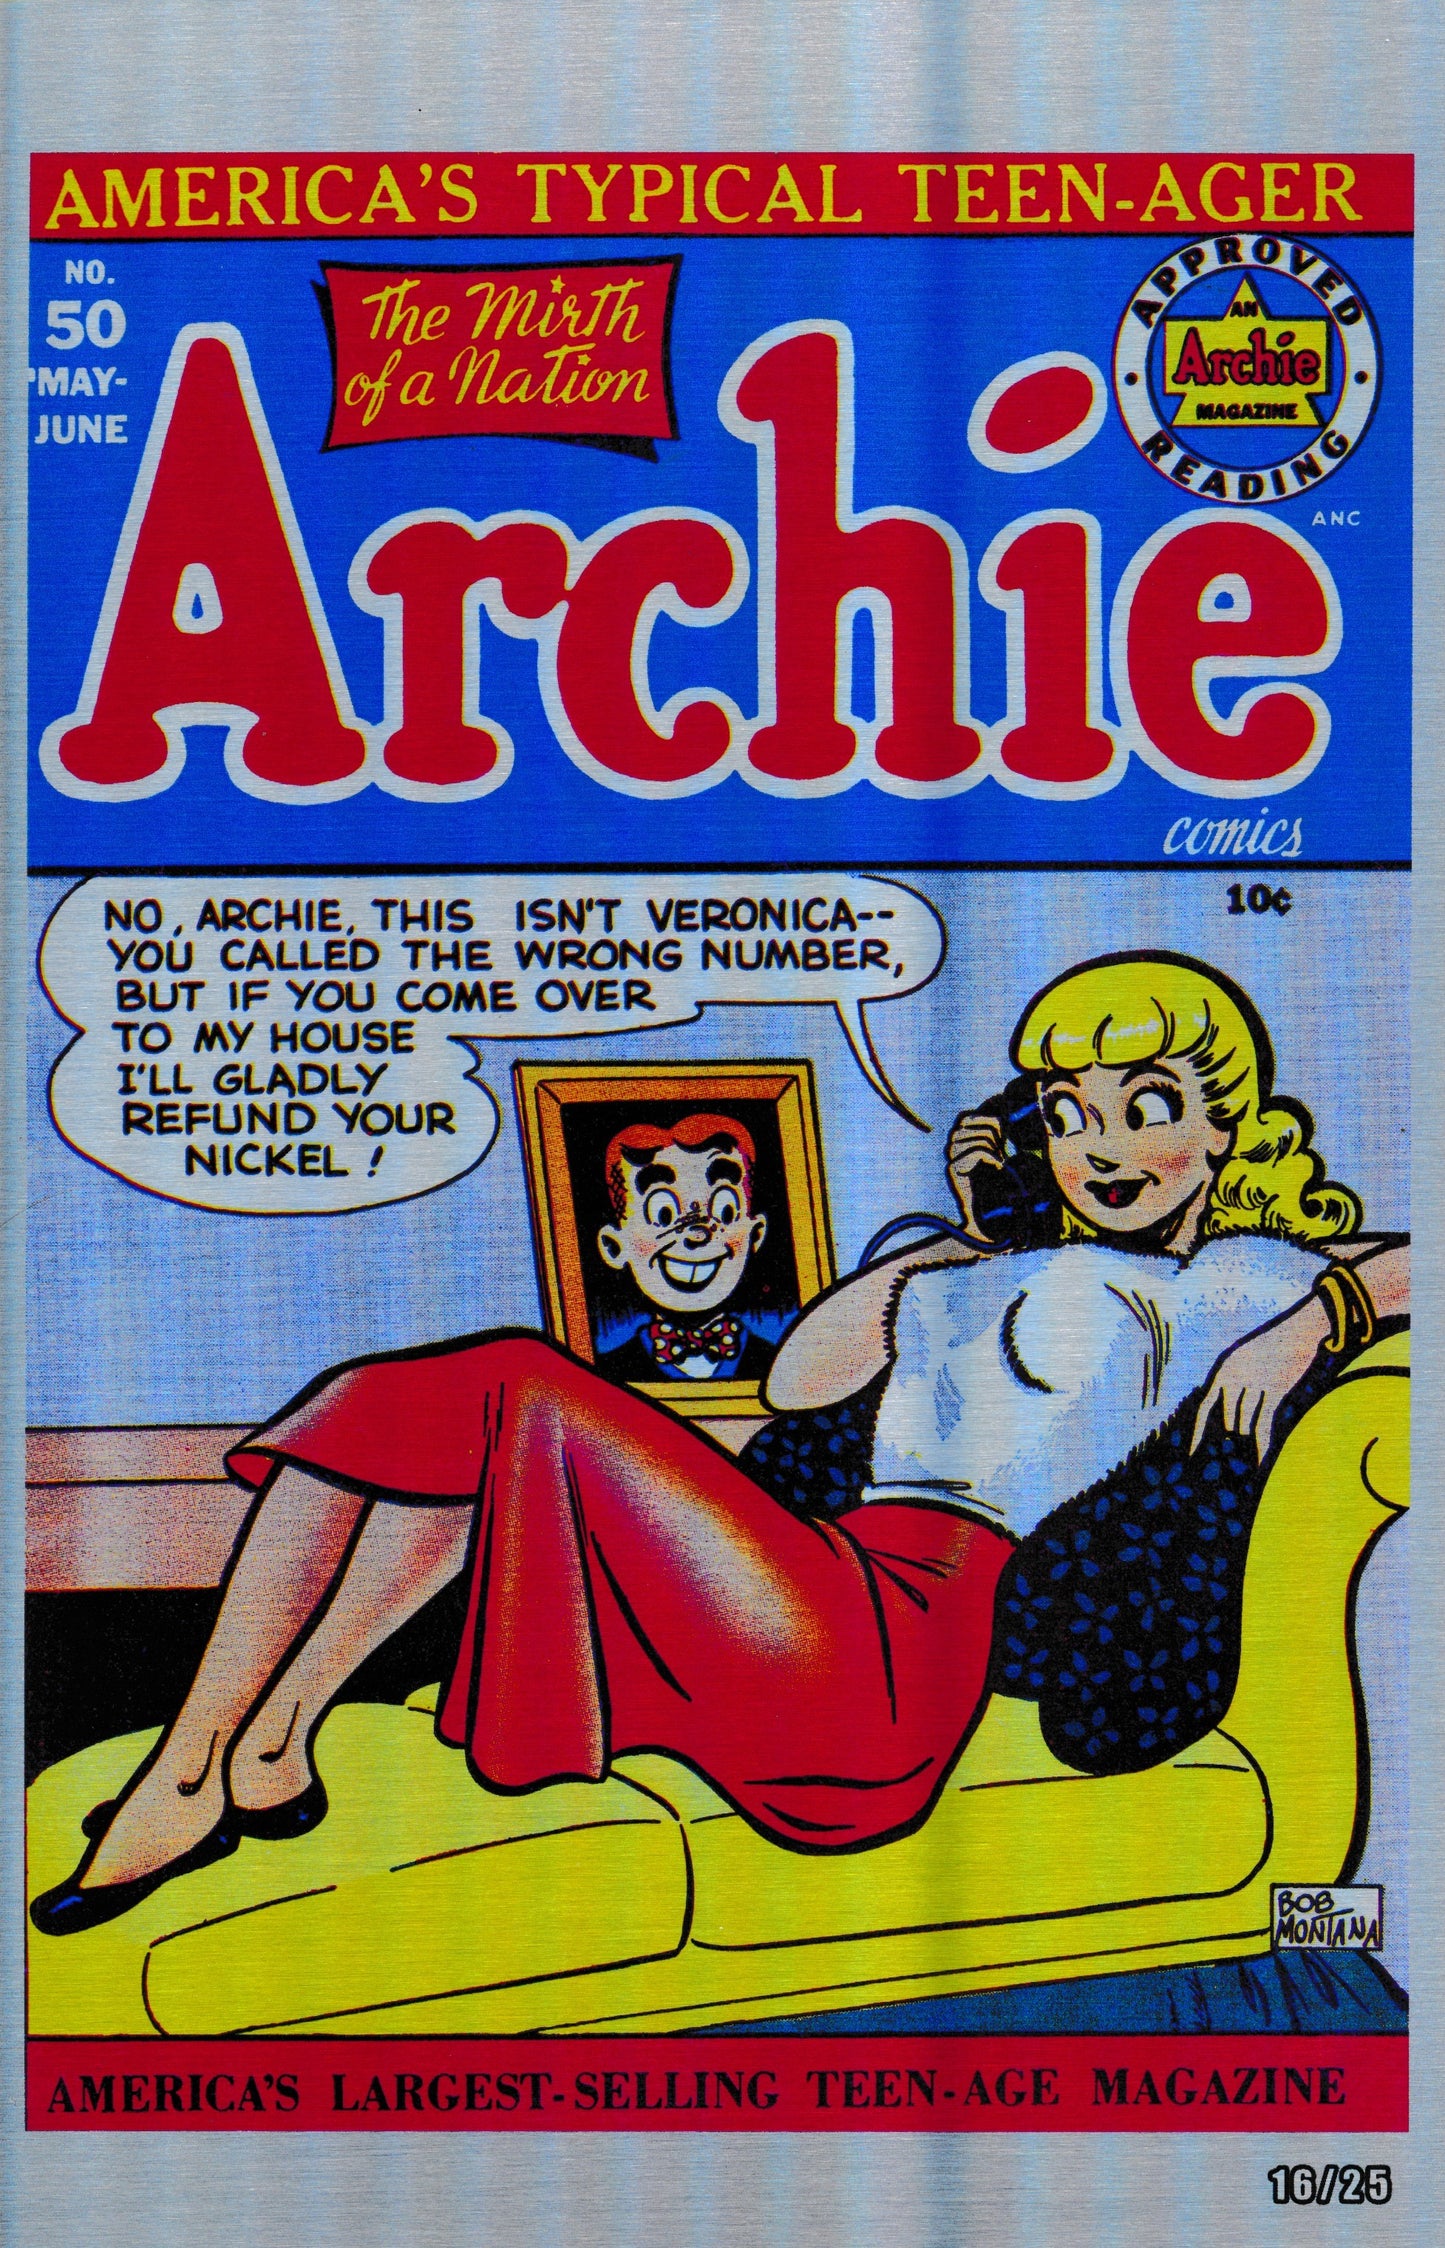 Archie Comics #50 Original 1951 Cover METAL Variant (Limited to 25)